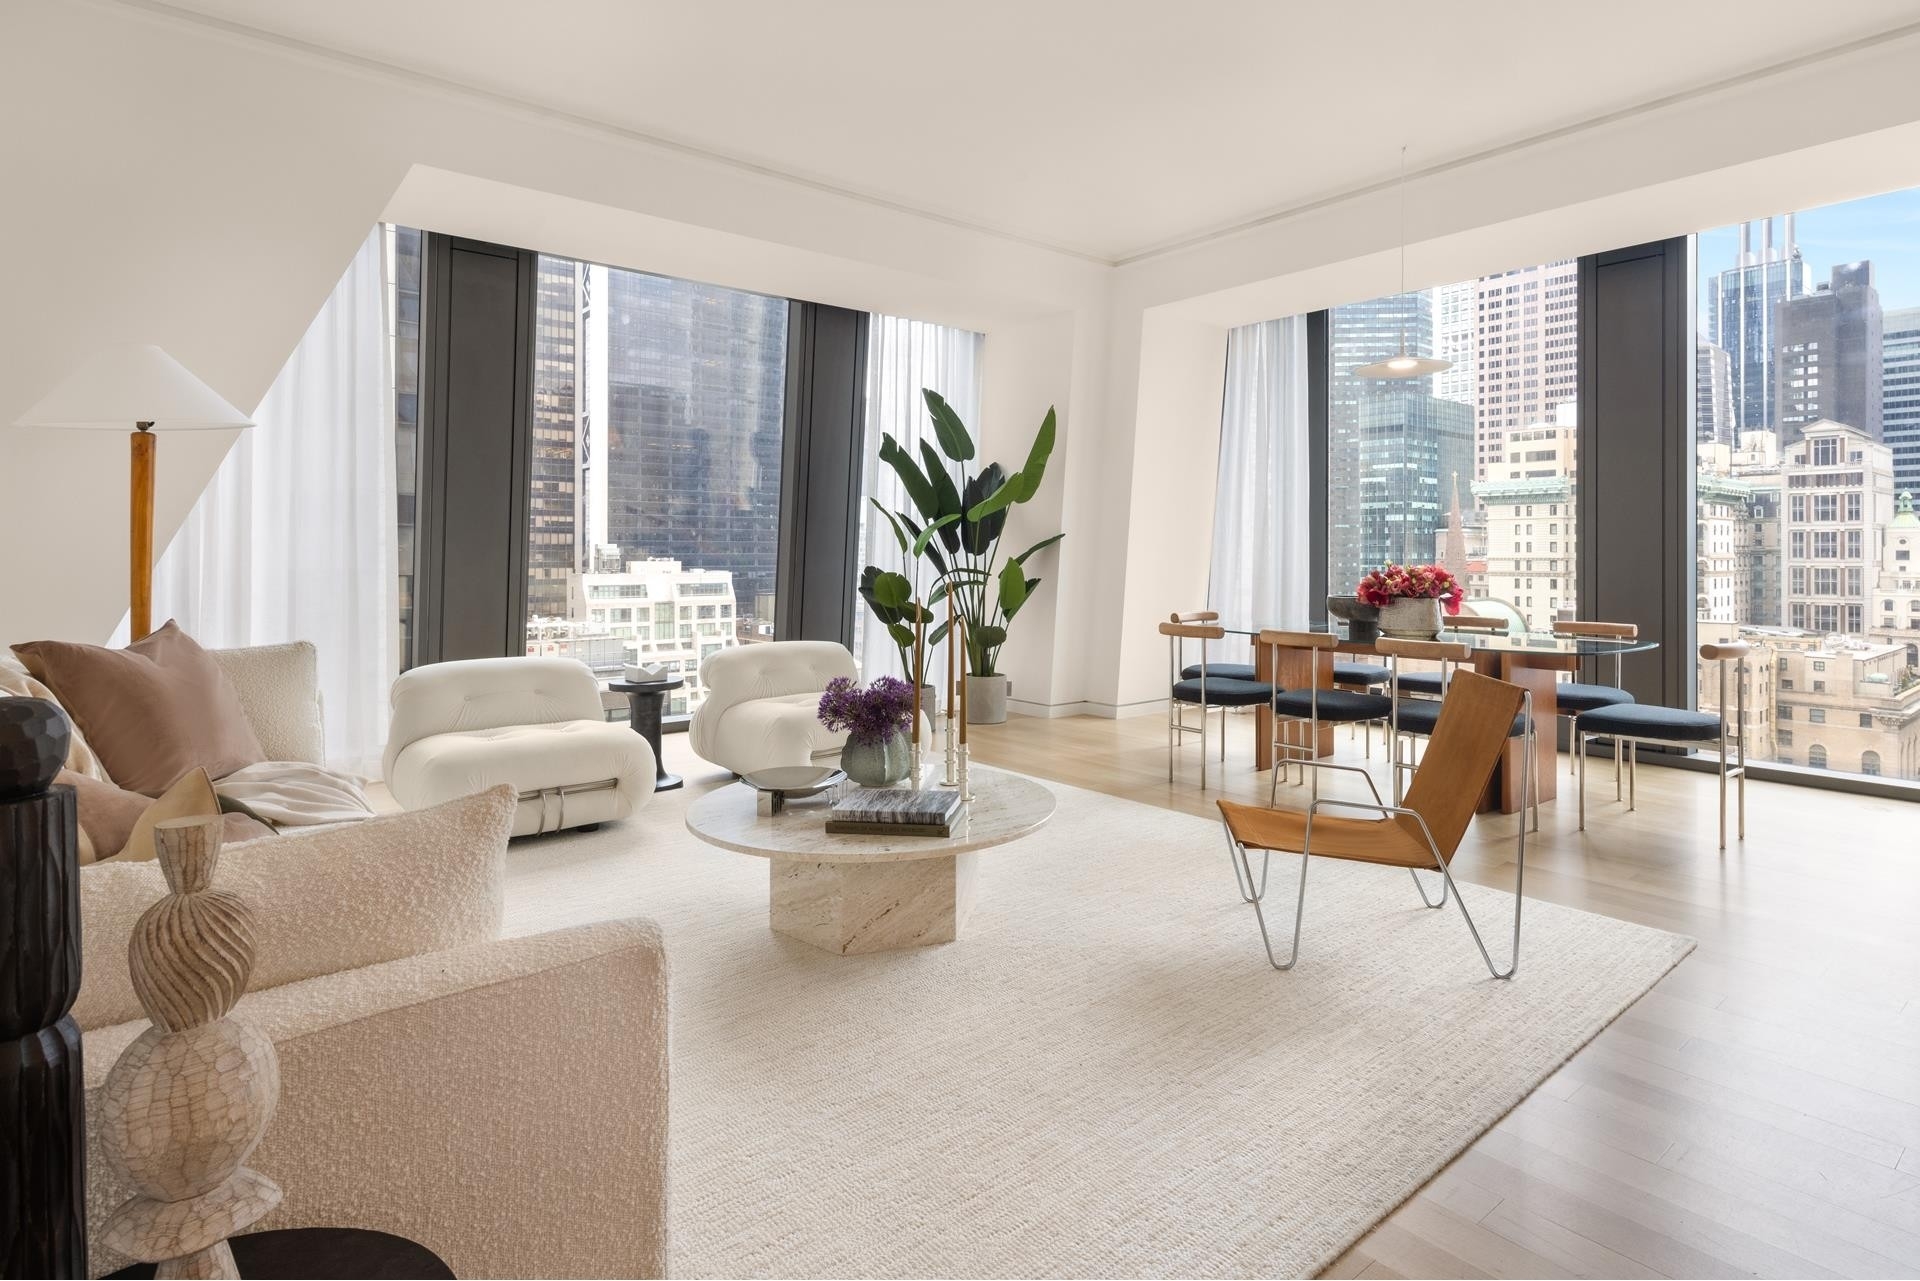 Condominium for Sale at 53W53, 53 53RD ST W, 22A Midtown West, New York, NY 10019